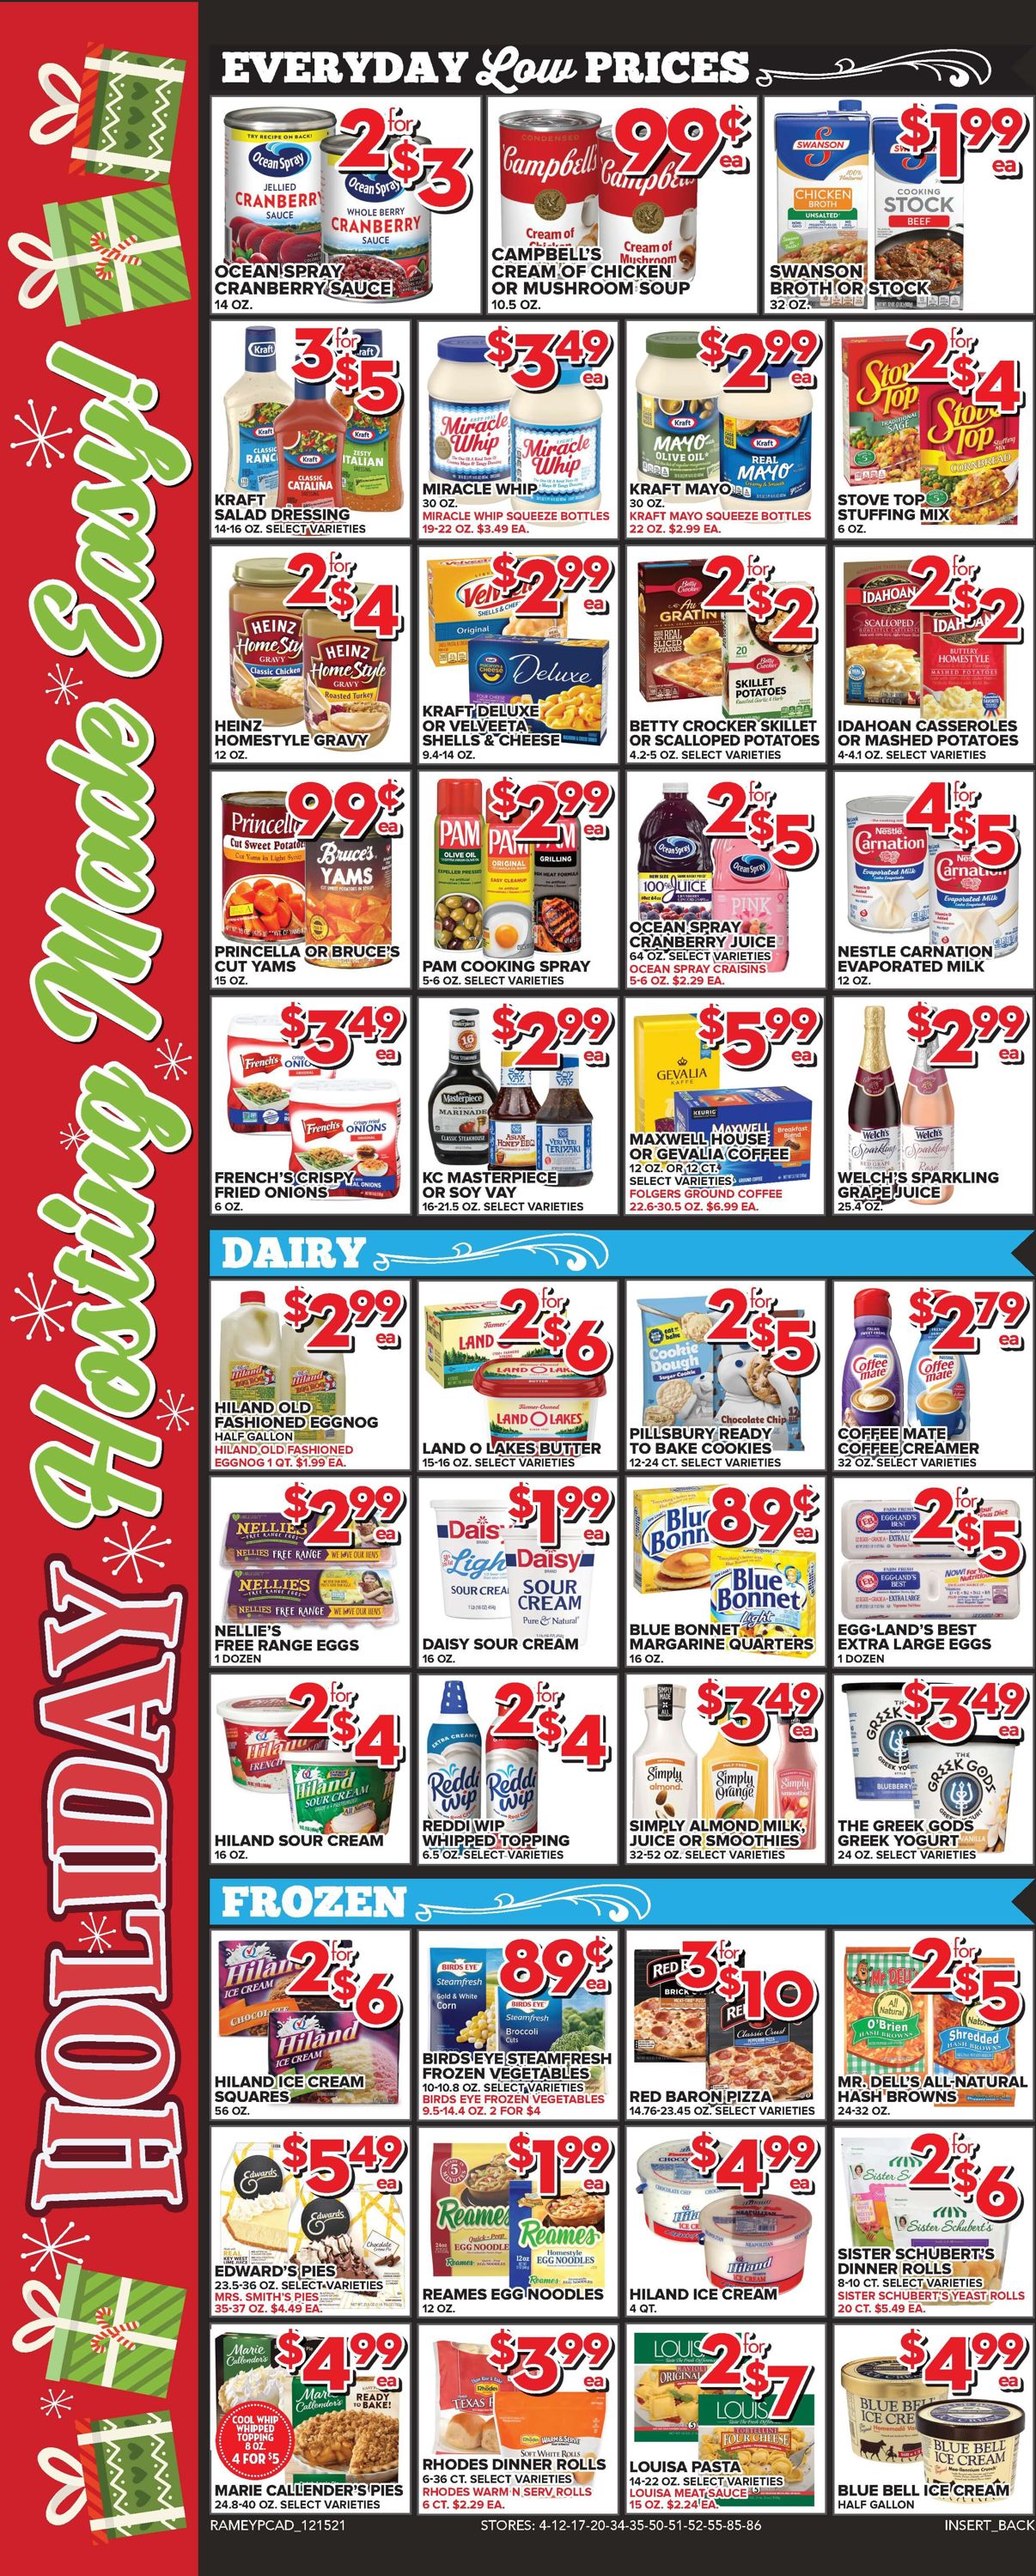 Price Cutter CHRISTMAS 2021 Weekly Ad Circular - valid 12/15-12/25/2021 (Page 6)